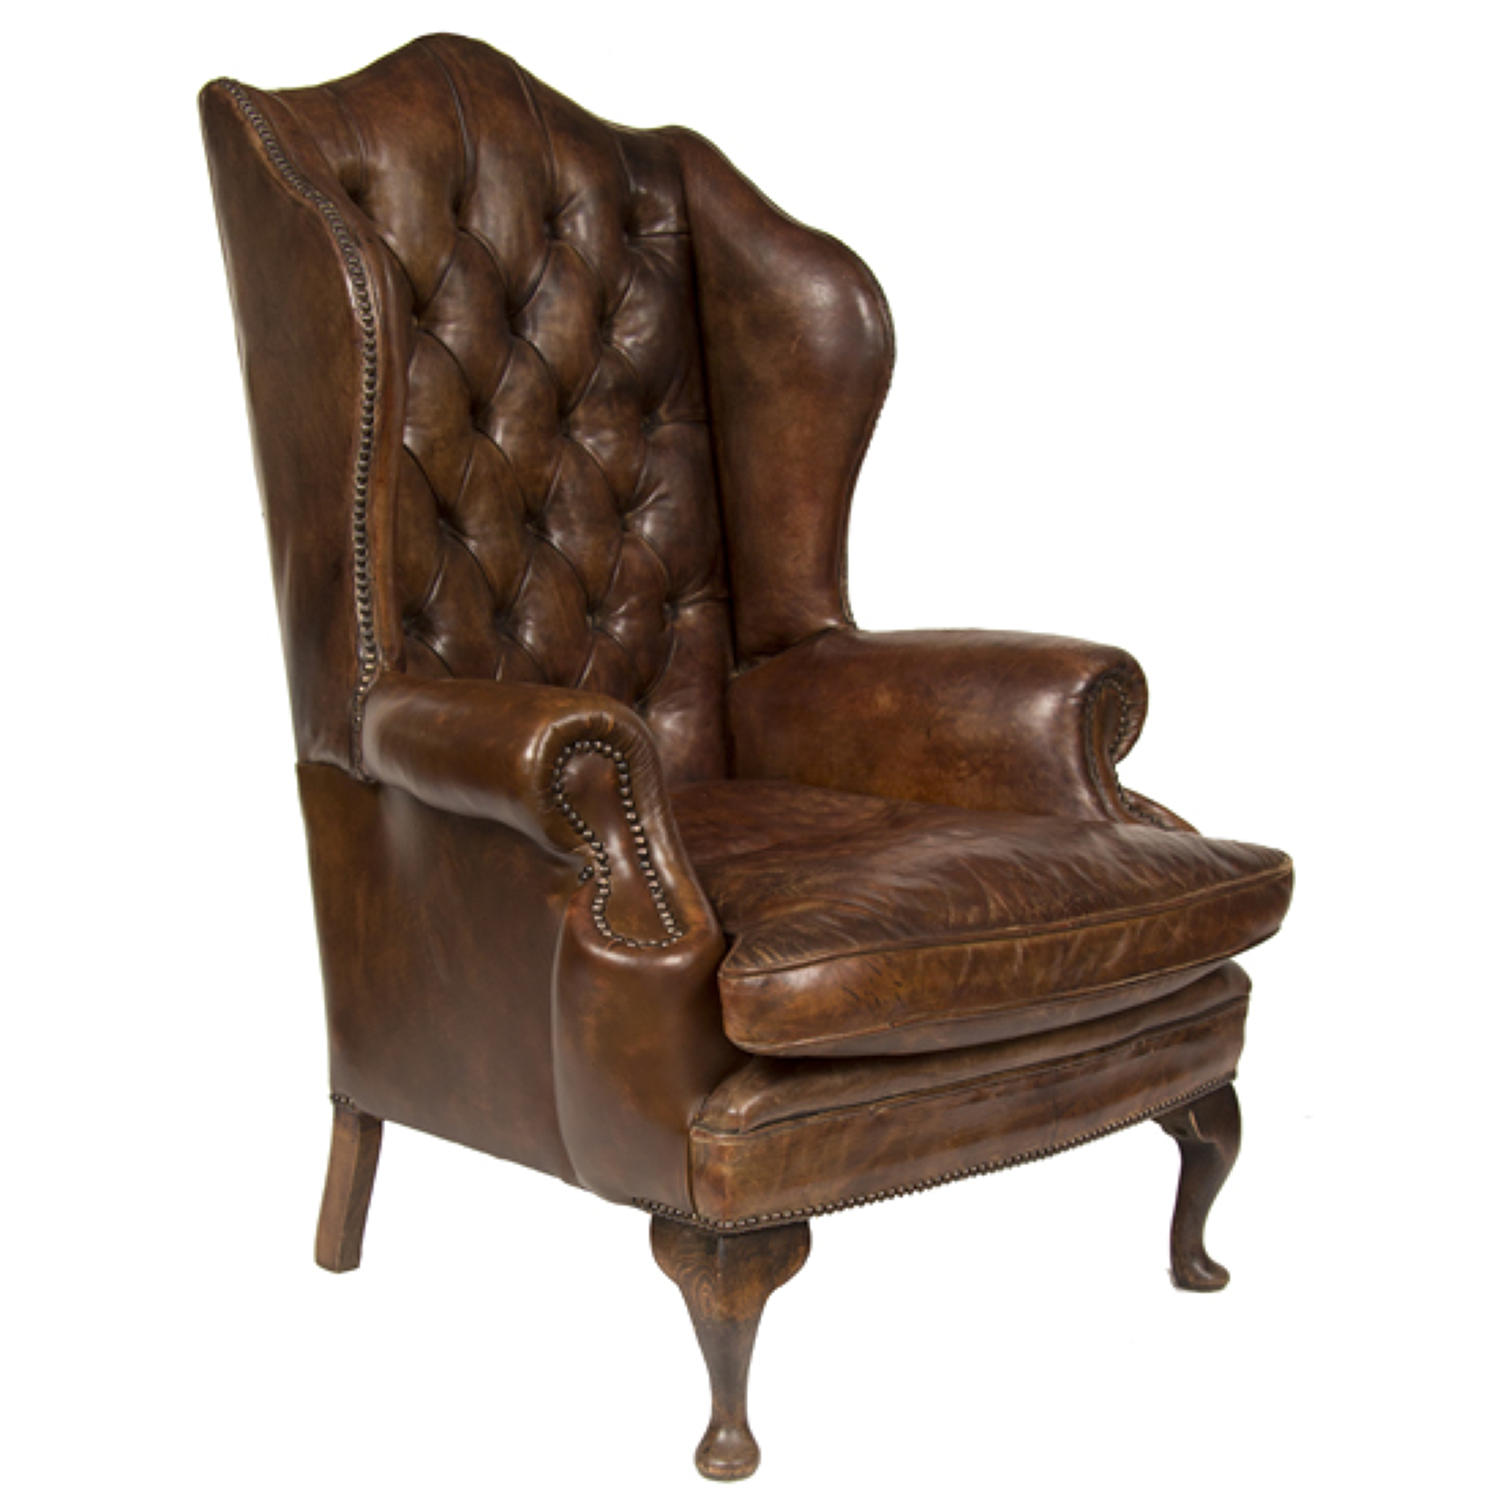 A Gentleman's Leather wing chair